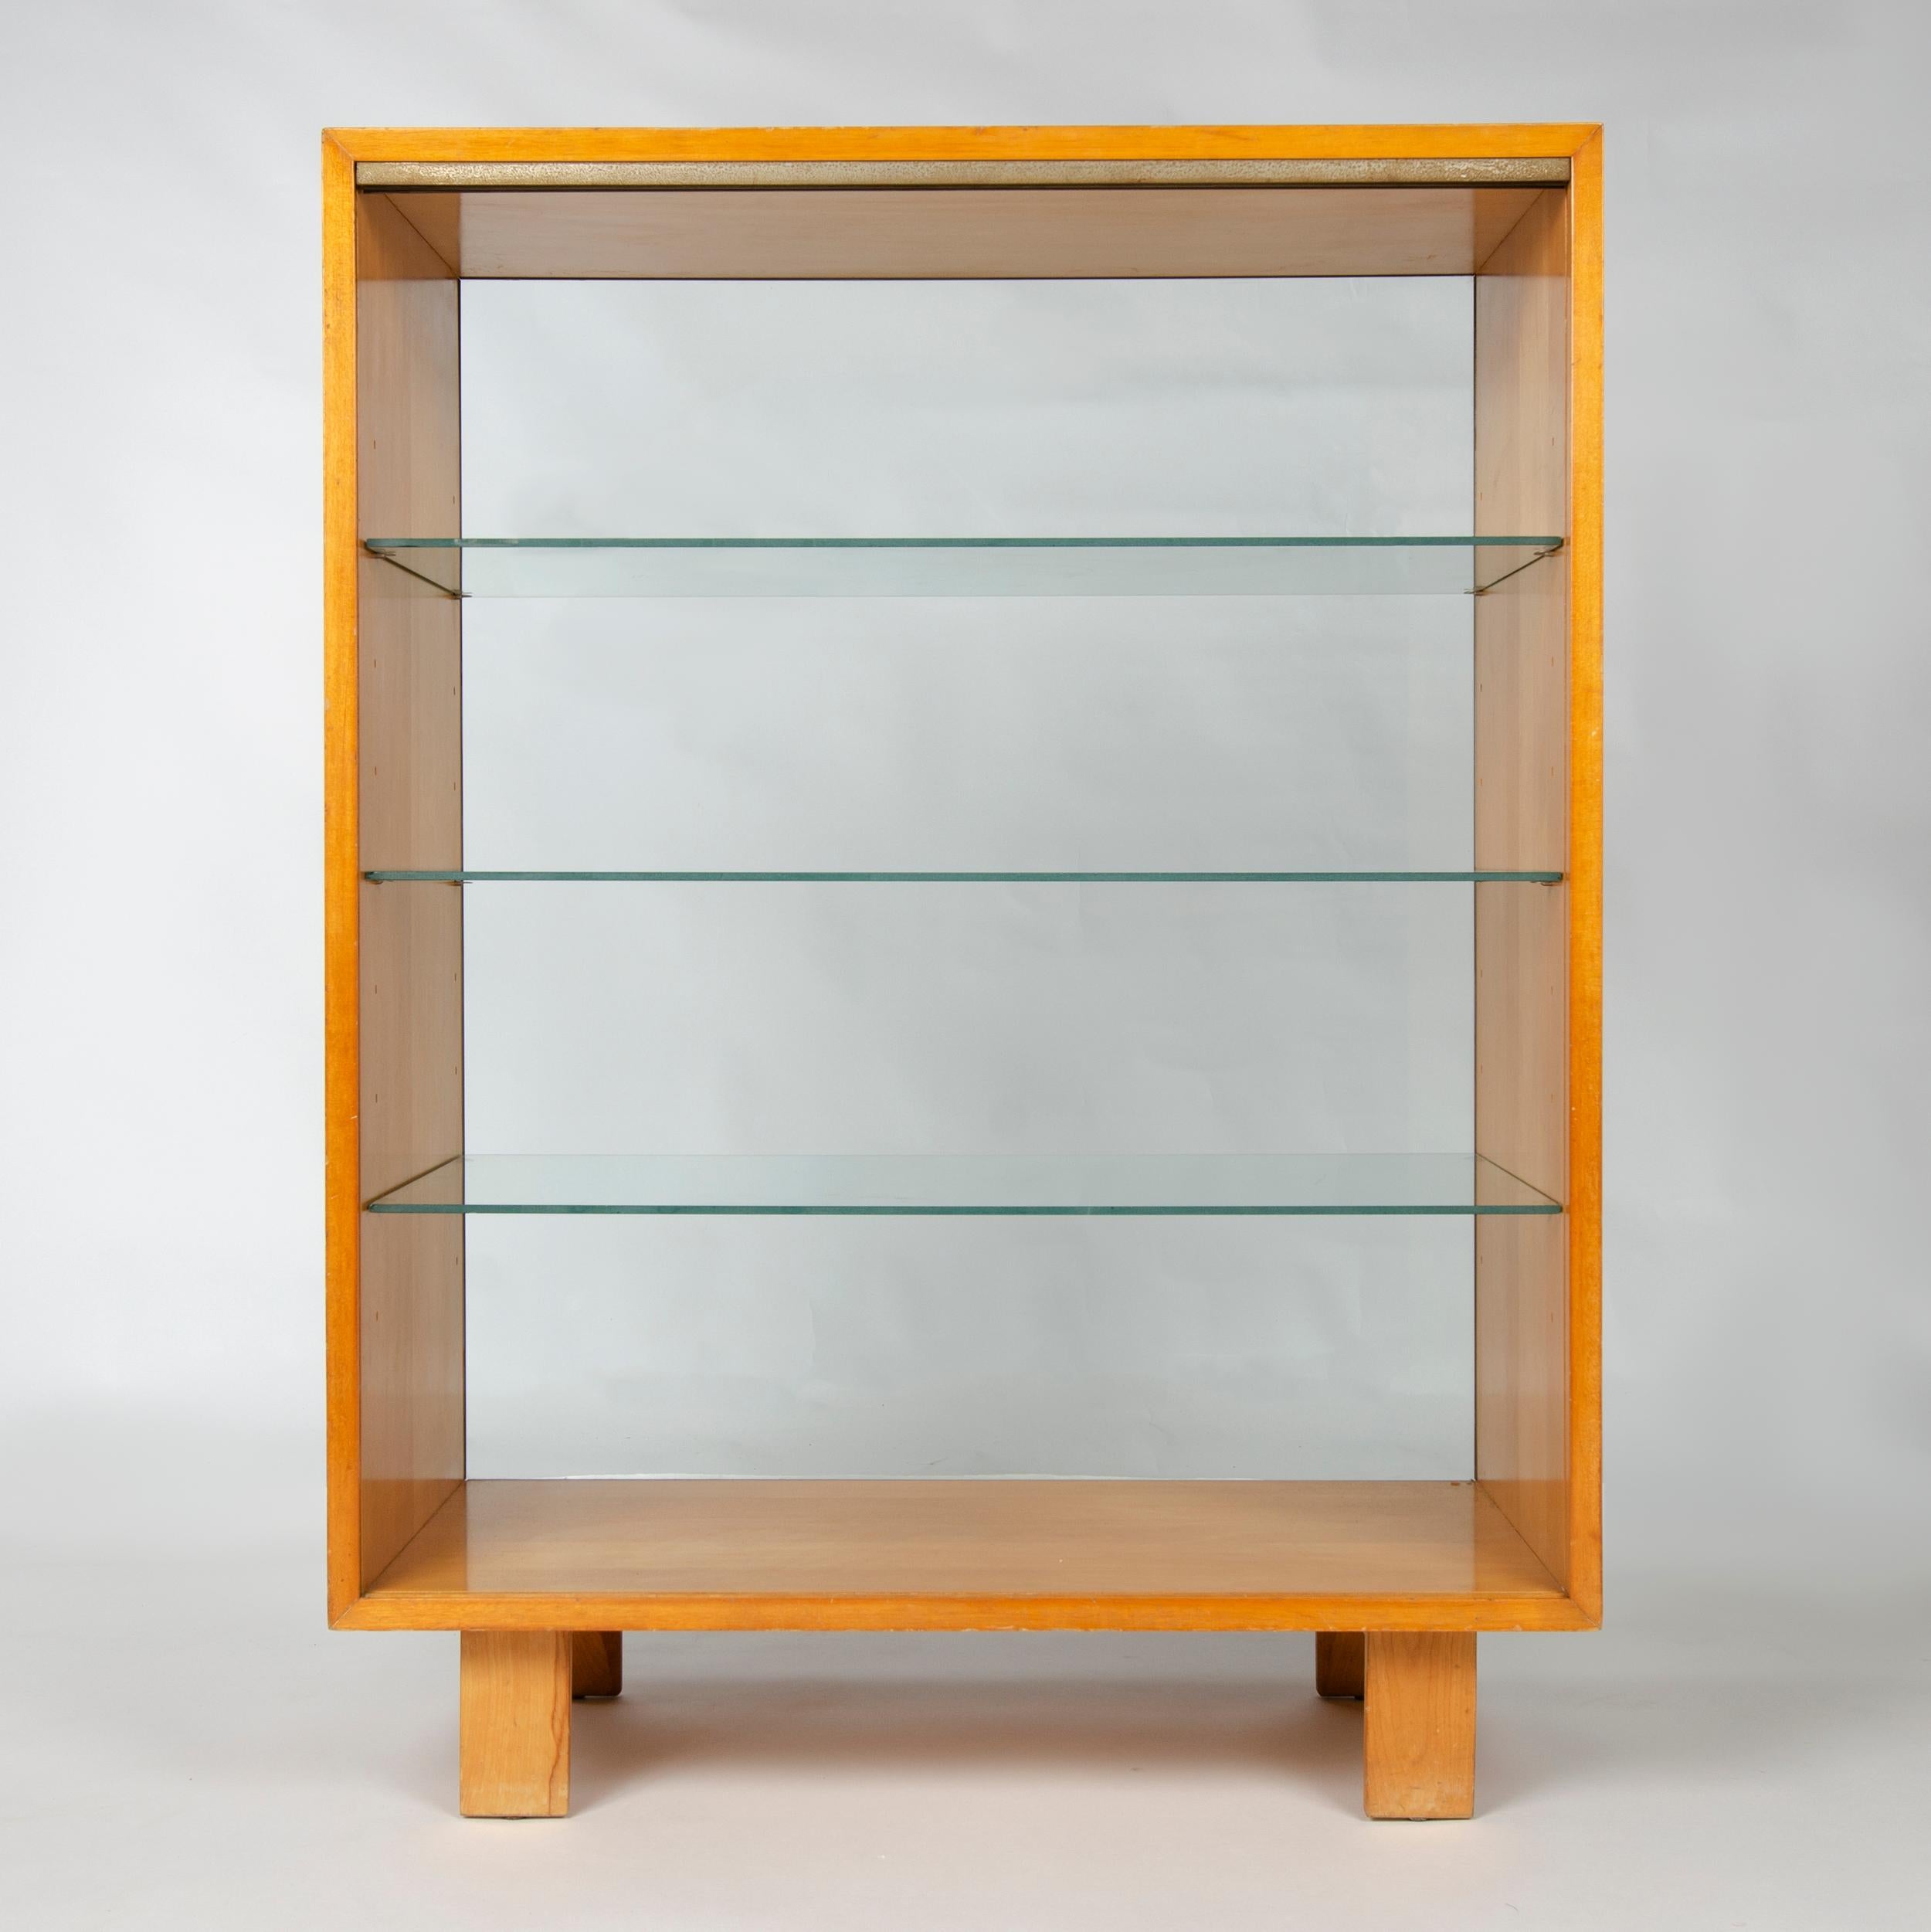 A solid walnut open cabinet or vitrine with three adjustable glass shelves and a solid glass paneled back.